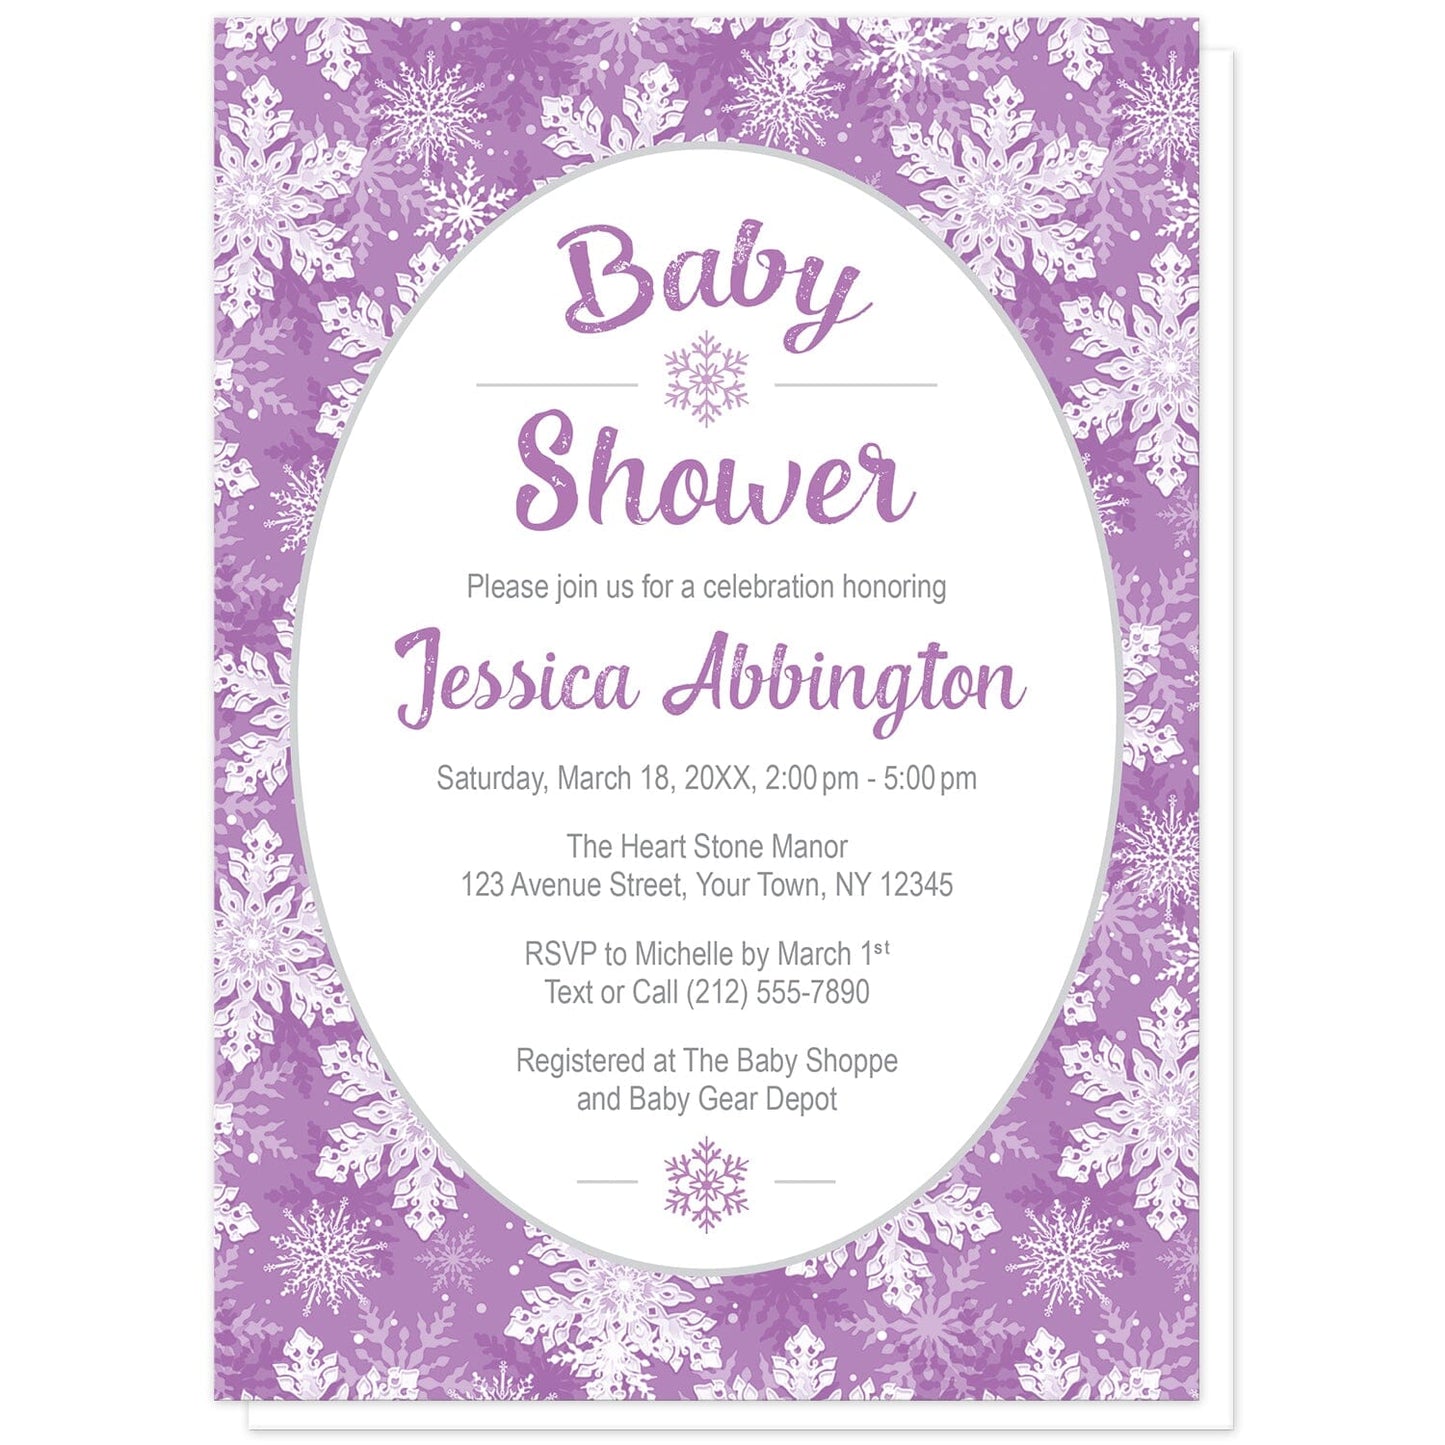 Purple Snowflake Baby Shower Invitations at Artistically Invited. Pretty purple snowflake baby shower invitations with your personalized baby shower celebration details custom printed in purple and gray in a white oval frame design over a purple and white snowflake pattern background.